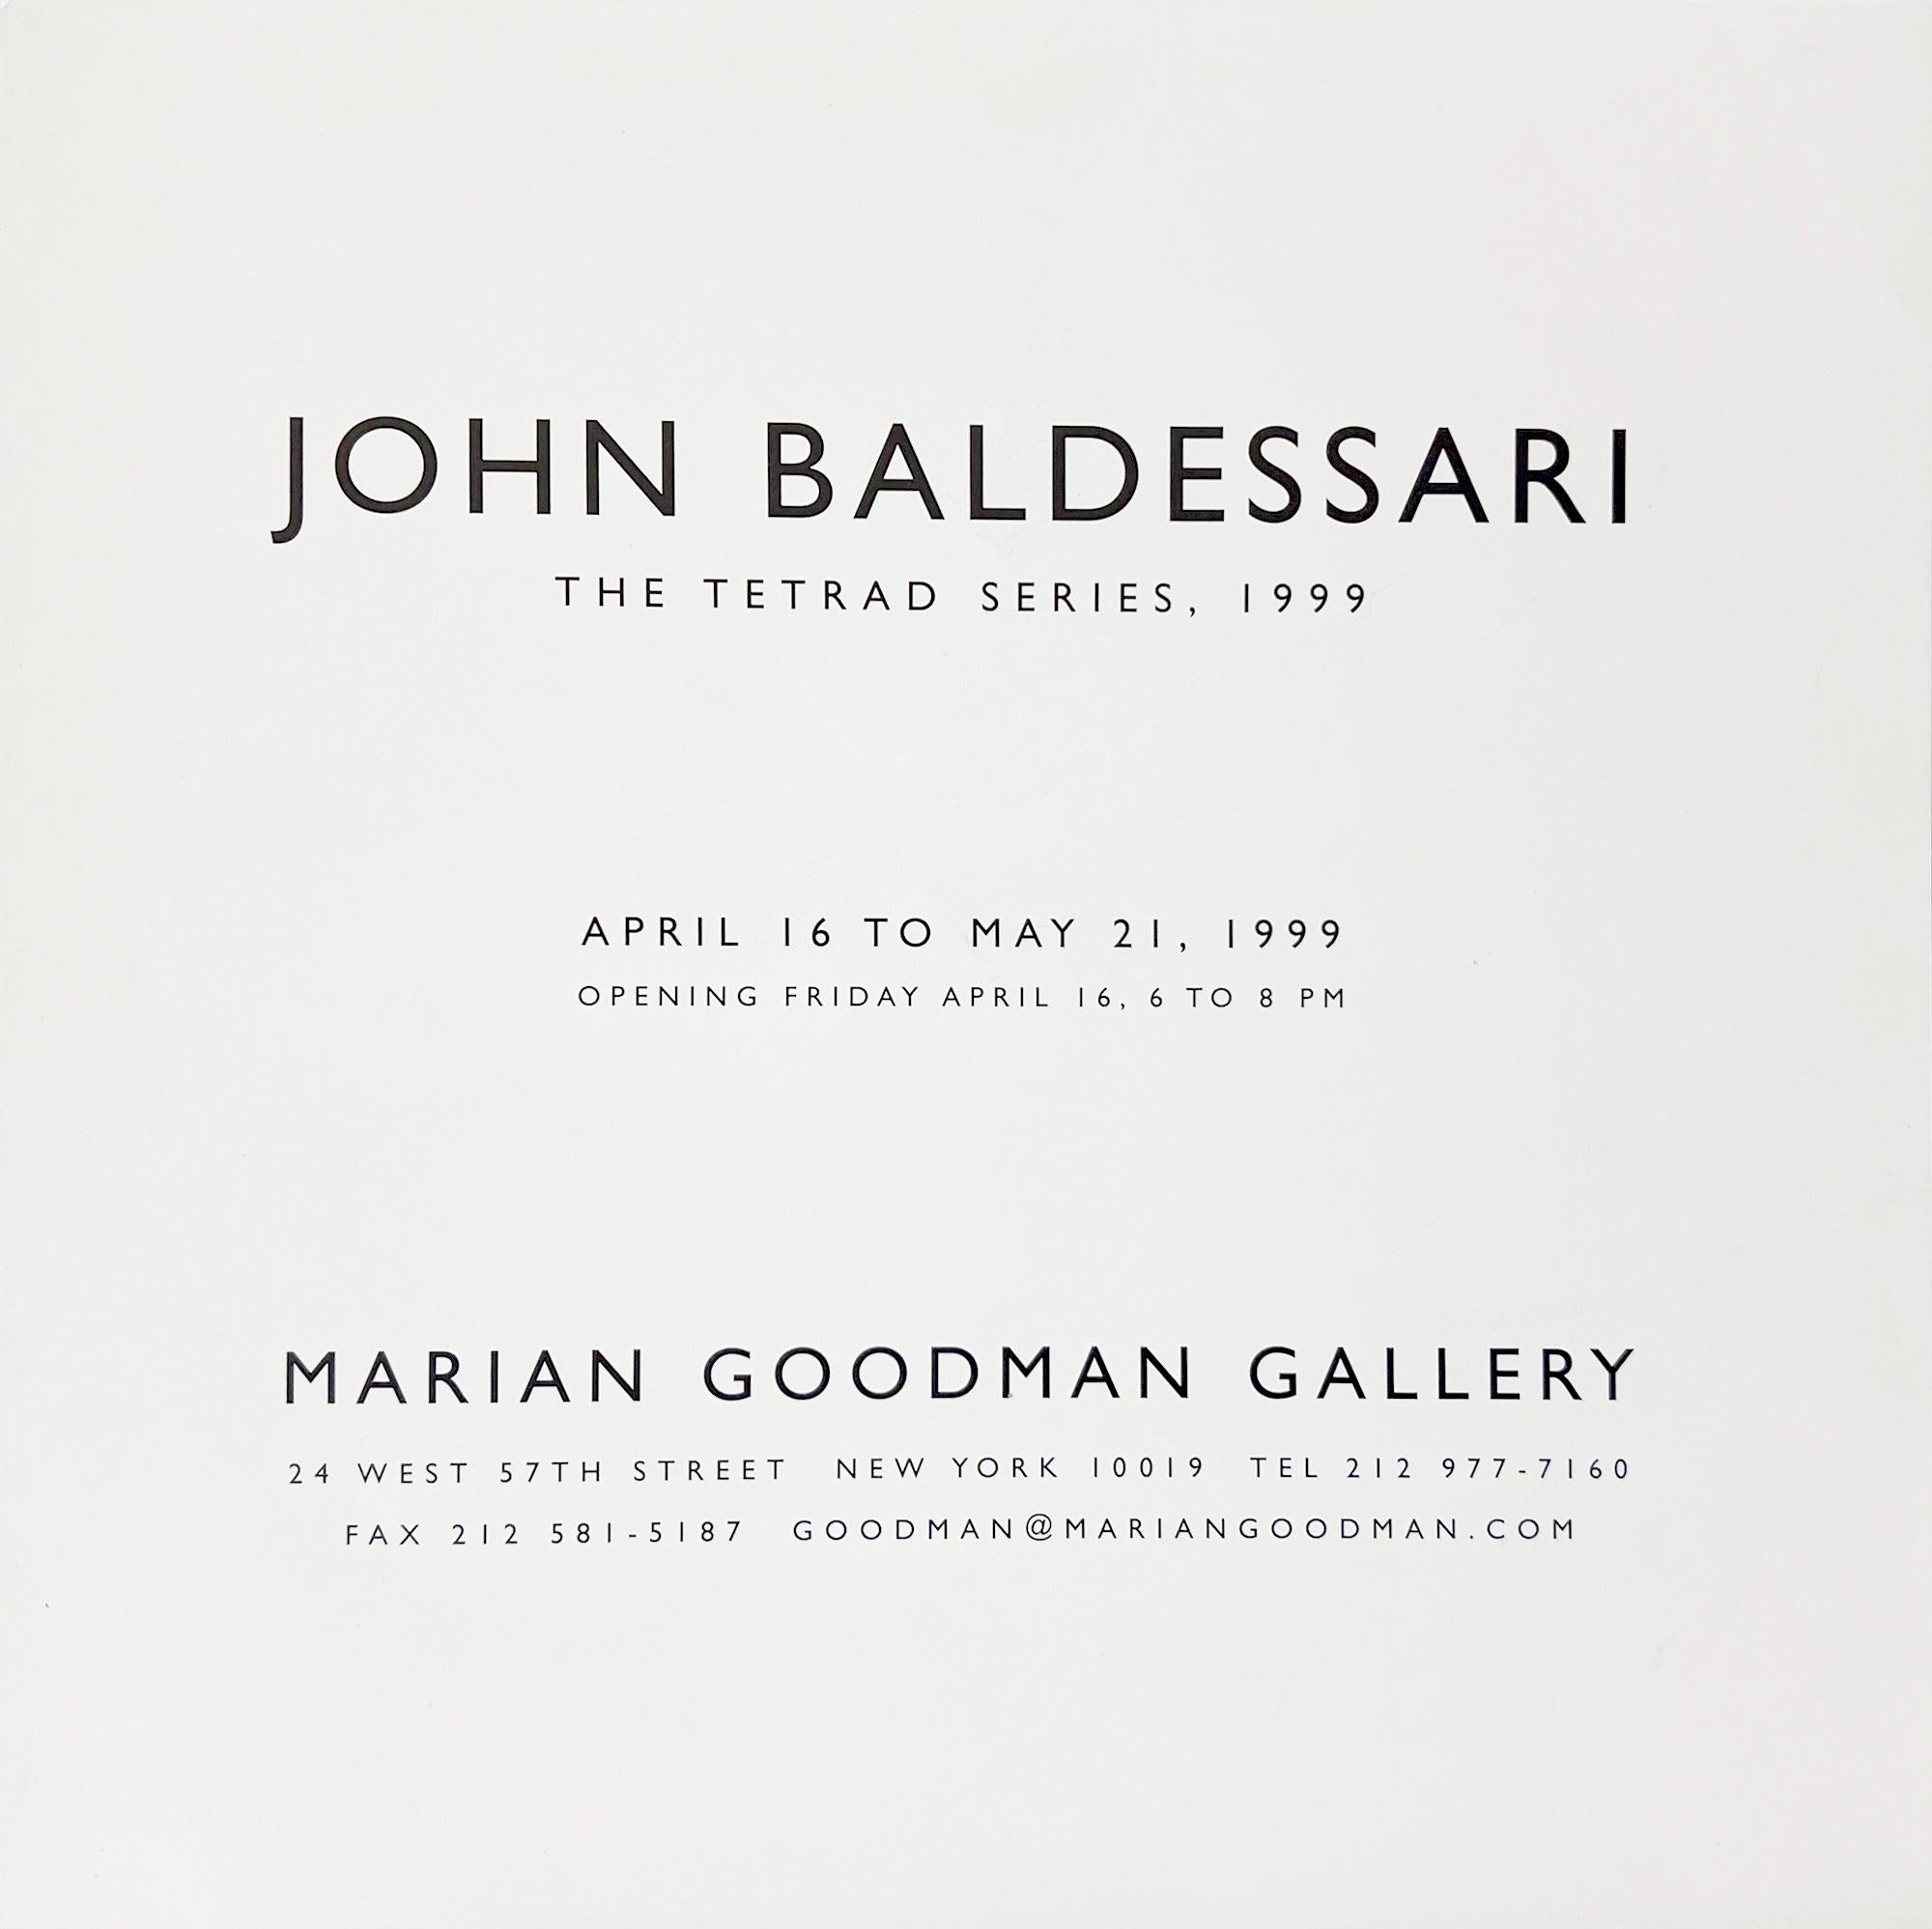 John Baldessari at Marian Goodman Gallery New York, 1999:
Rare vintage original 1990s exhibition poster to commensurate the opening of 'John Baldessari, The Tetrad Series', 1999 at Marian Goodman Gallery.' This piece features a grid of four images